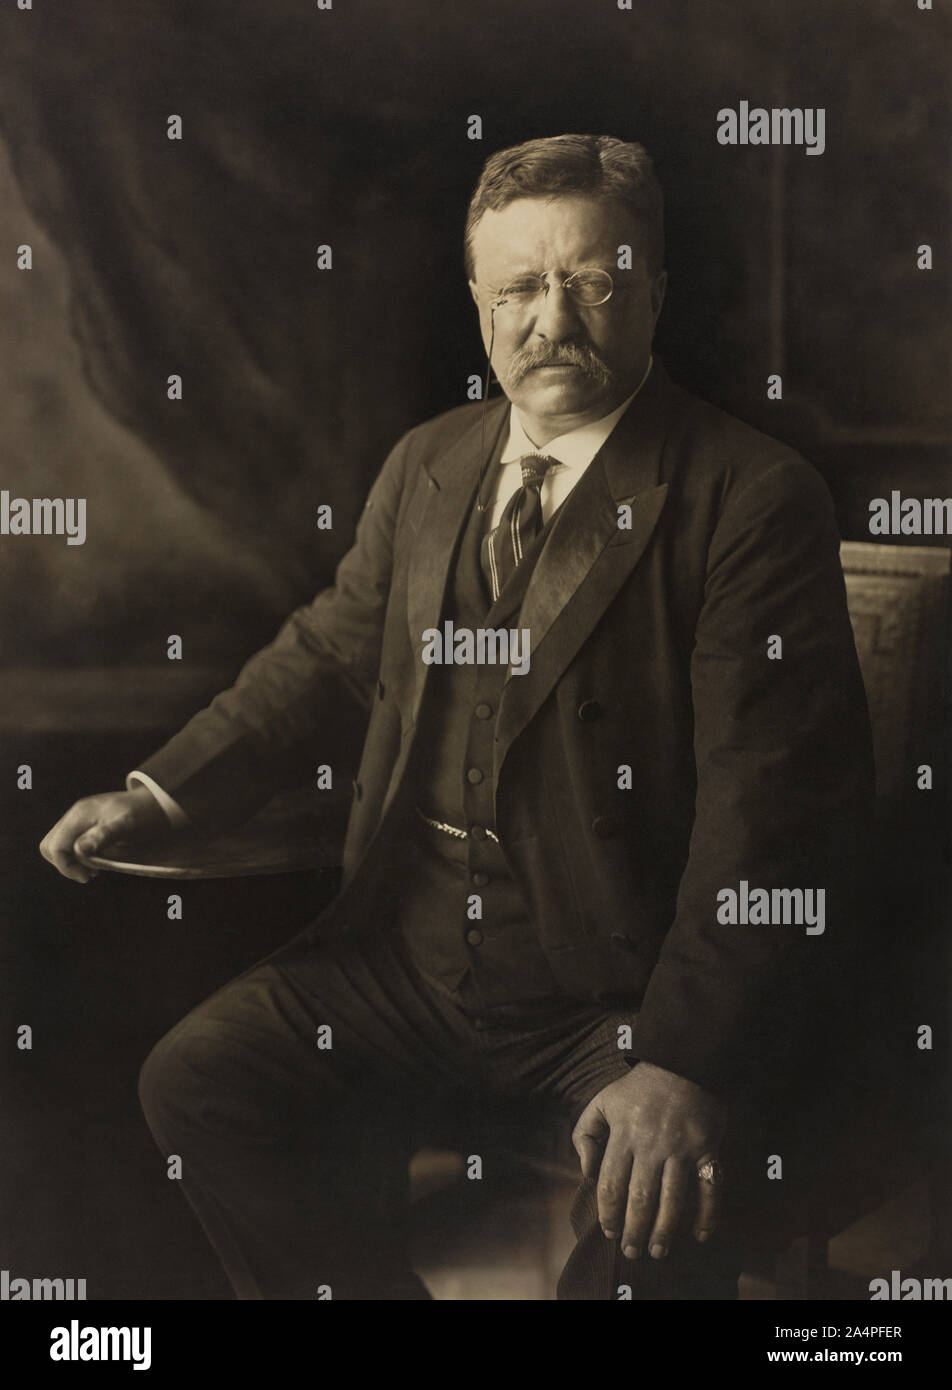 Theodore Roosevelt (1858-1919), 26th President of the United States 1901-09, Three-Quarter Length Portrait, 1910 Stock Photo